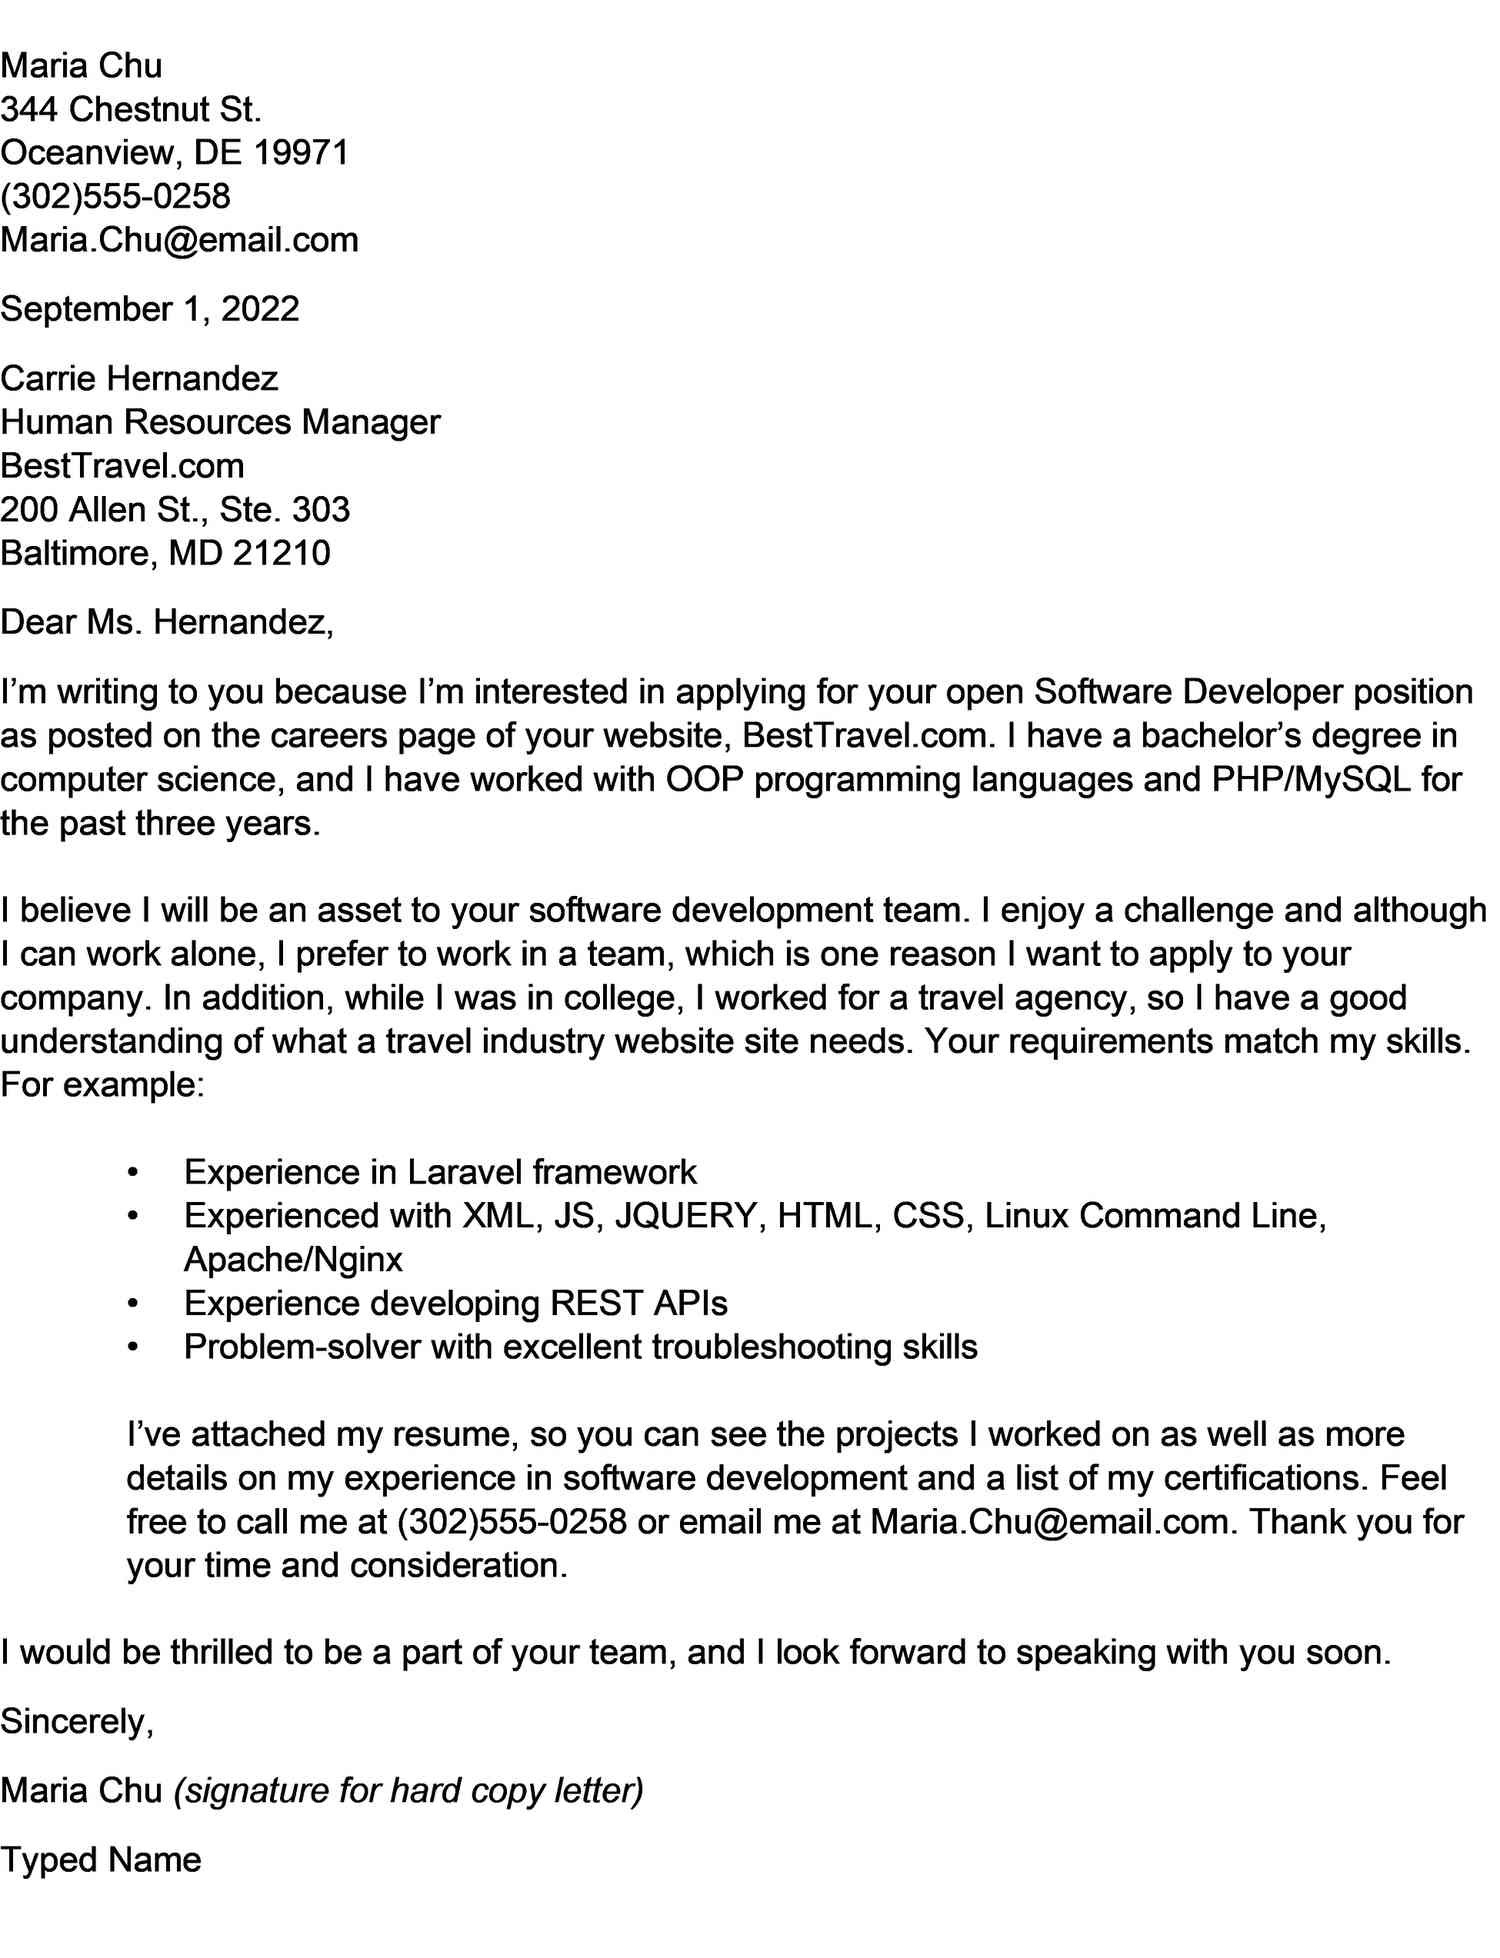 Sample Application Letter with attached Resume Cover Letter Examples Listed by Type Of Job